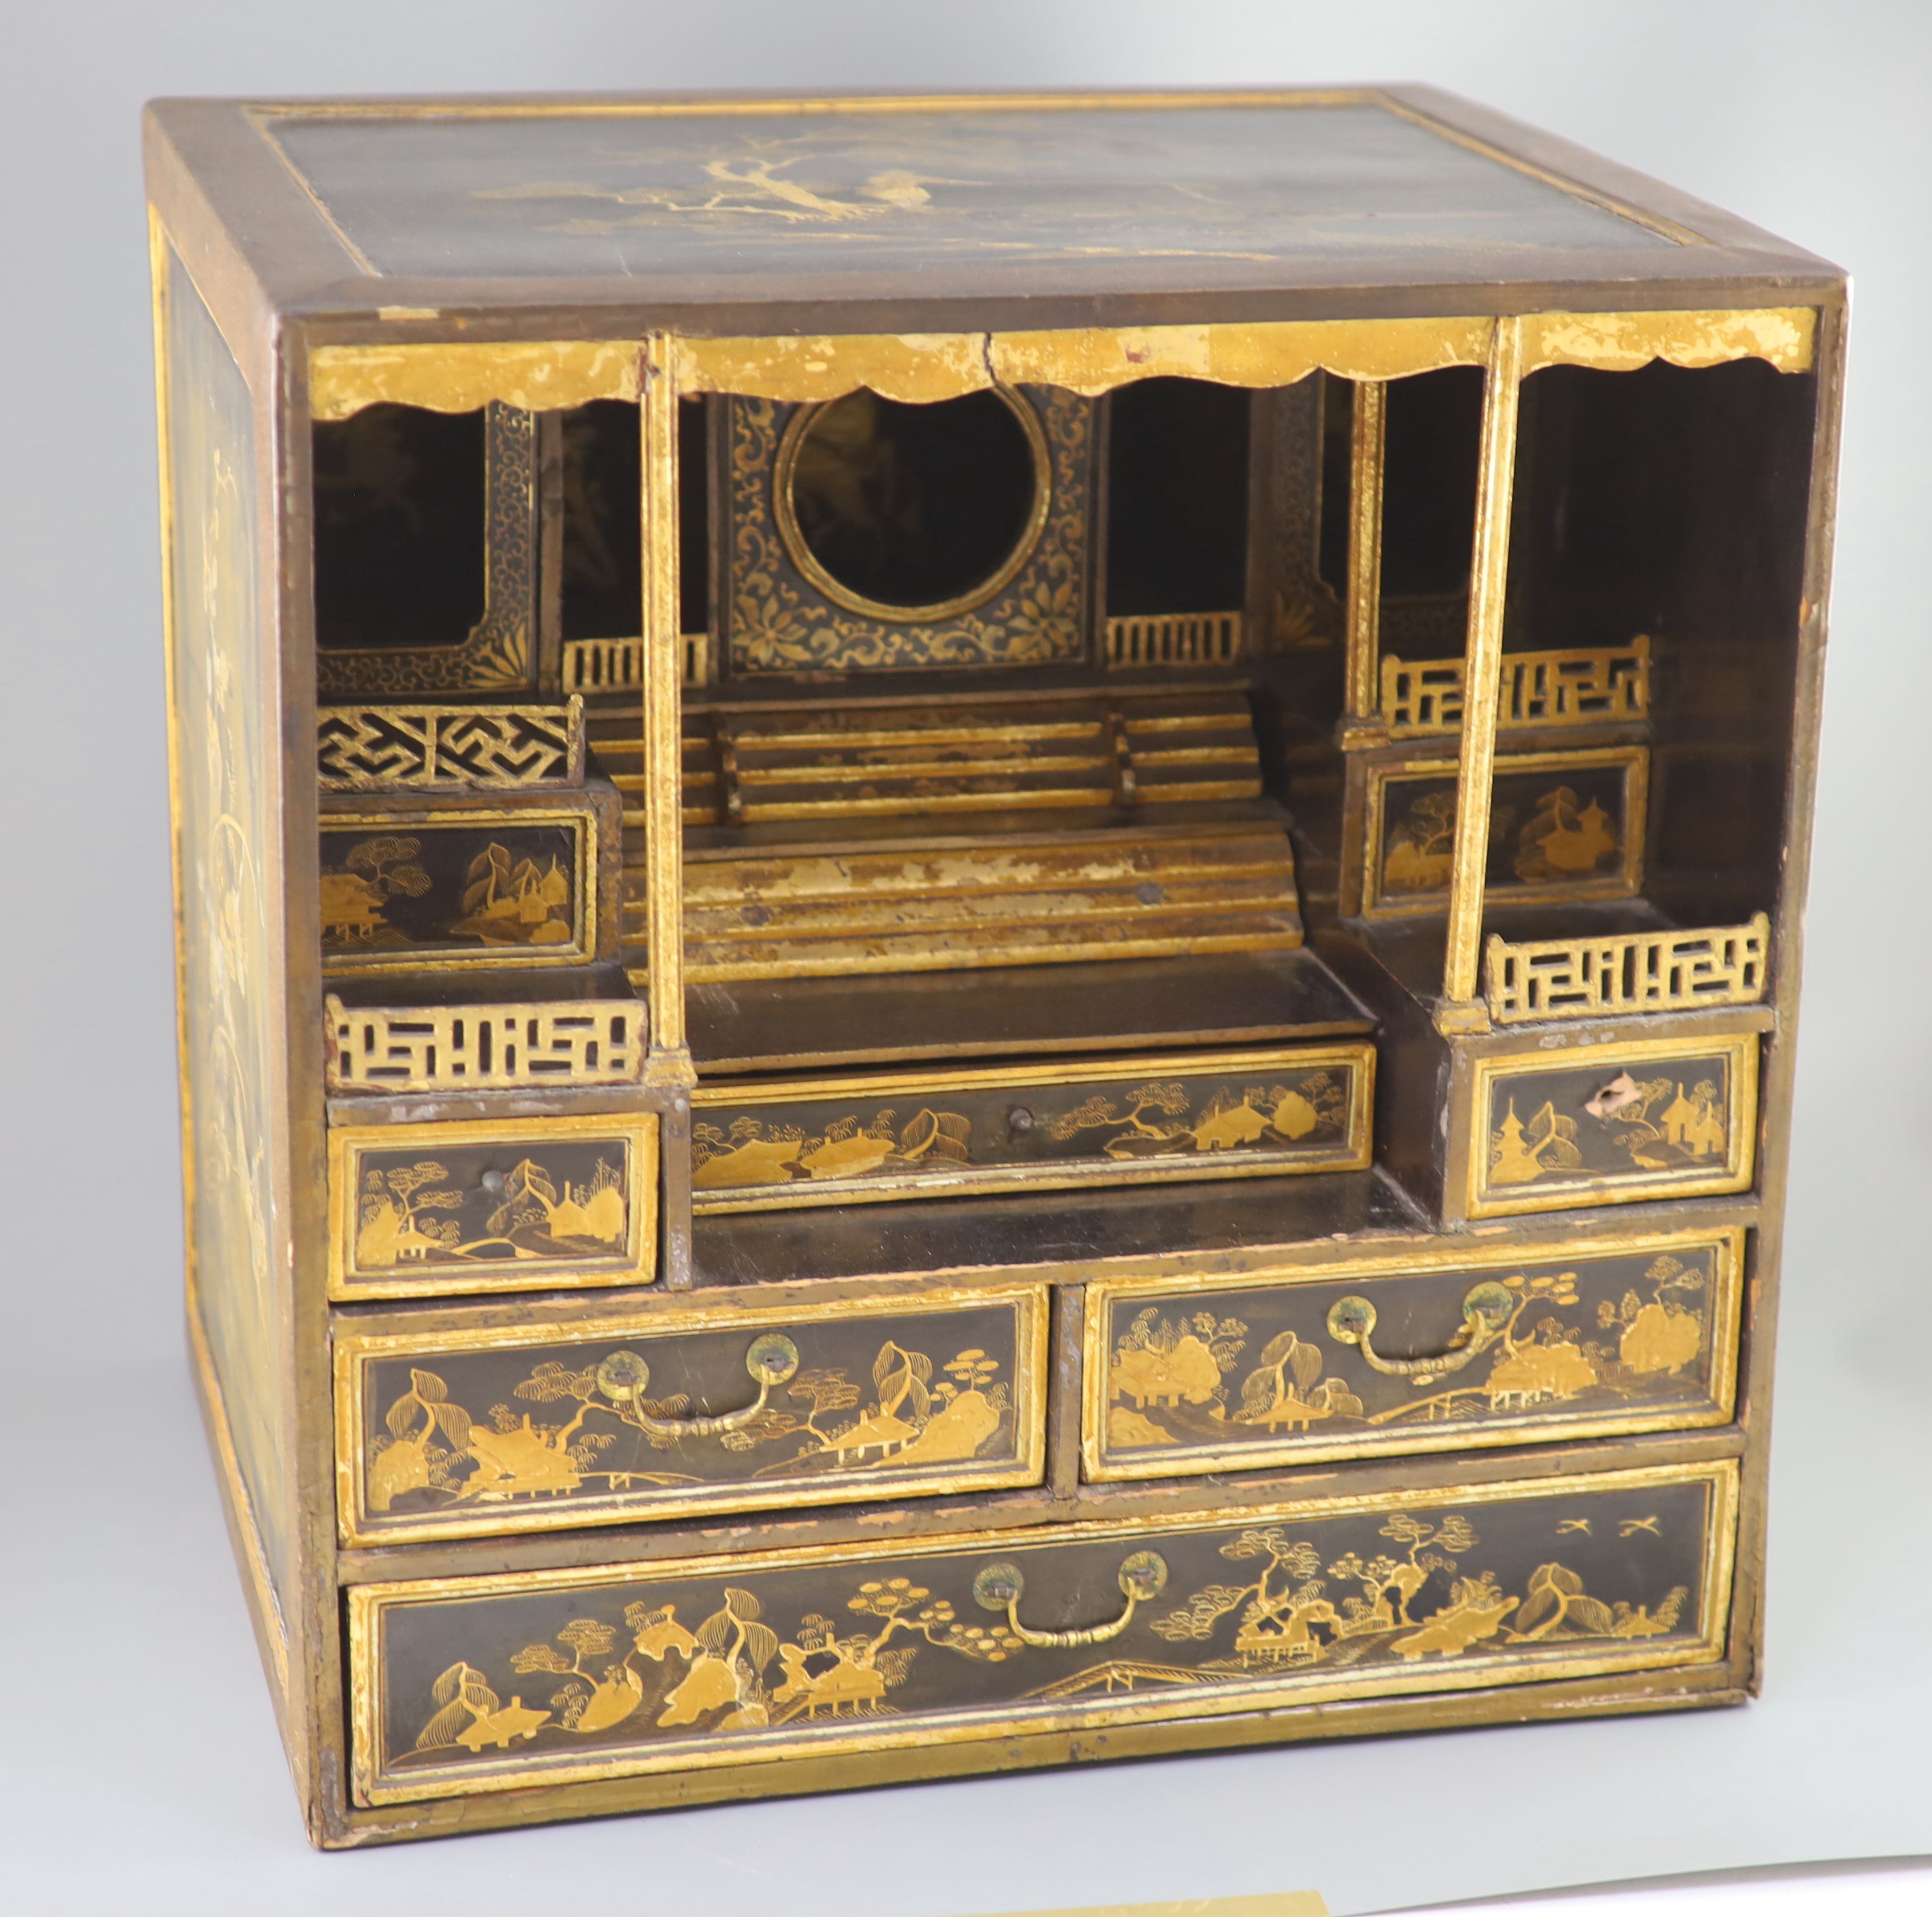 A Japanese gilt decorated black lacquer shrine cabinet, 19th century, 46cm high, 46cm wide, 38cm deep, Provenance - A. T. Arber-Cooke